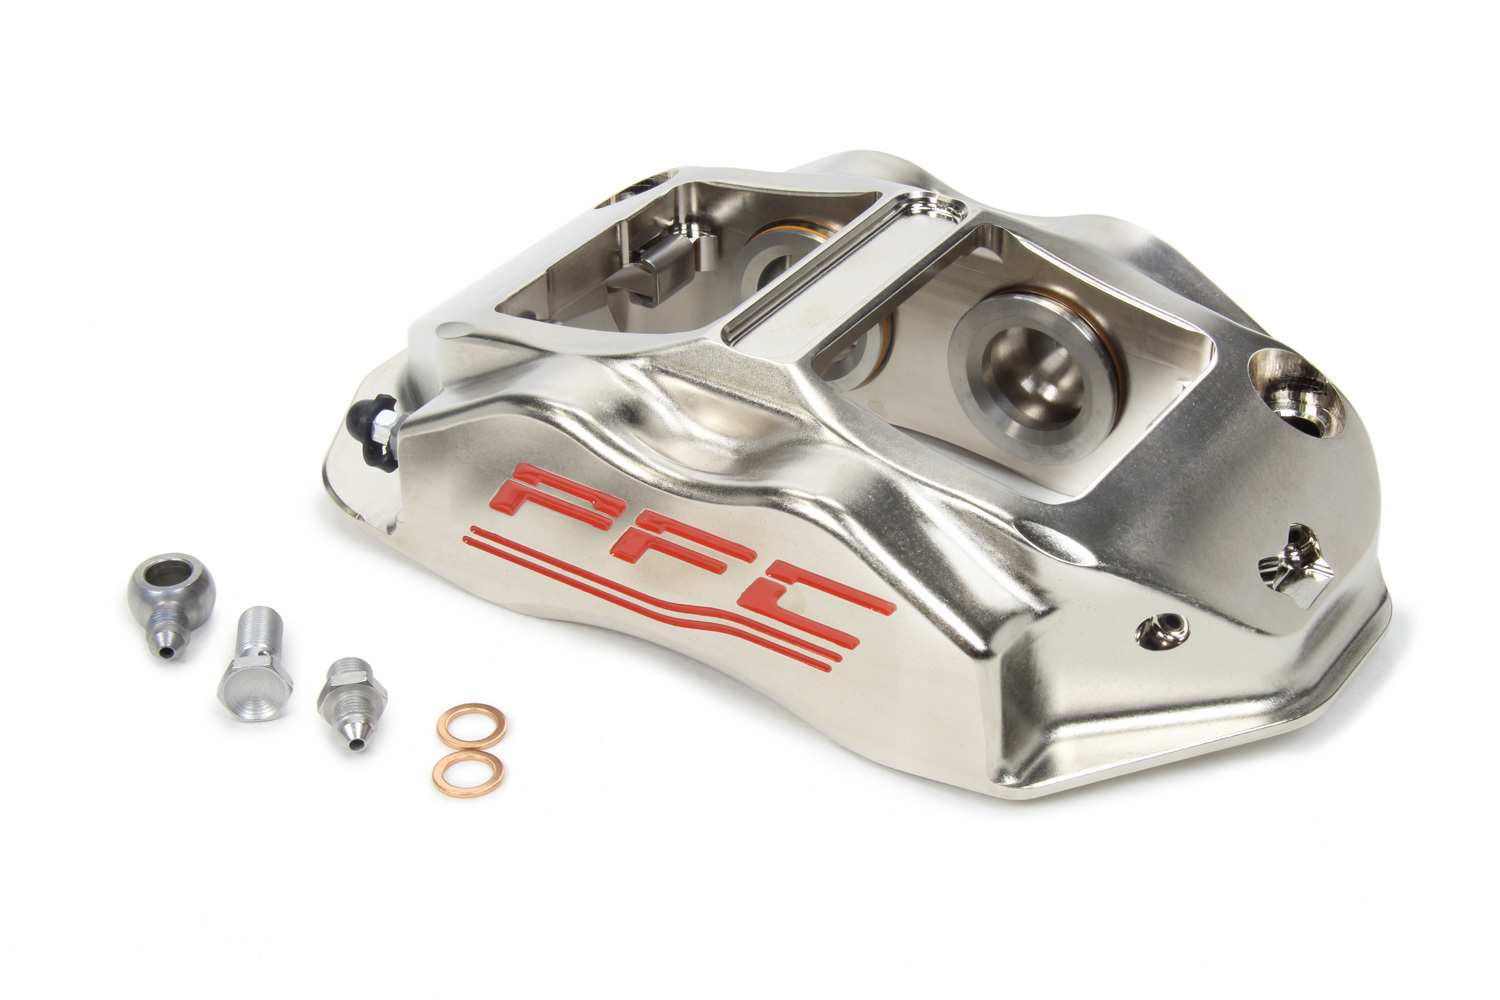 Performance Friction 94-323-290-365-02 Brake Caliper, ZR94, Passenger Side, Leading, 4 Piston, Aluminum, Nickel Plated, 12.716 in OD, 1.250 in Thick Rotor, 7.00 Radial Mount, Each